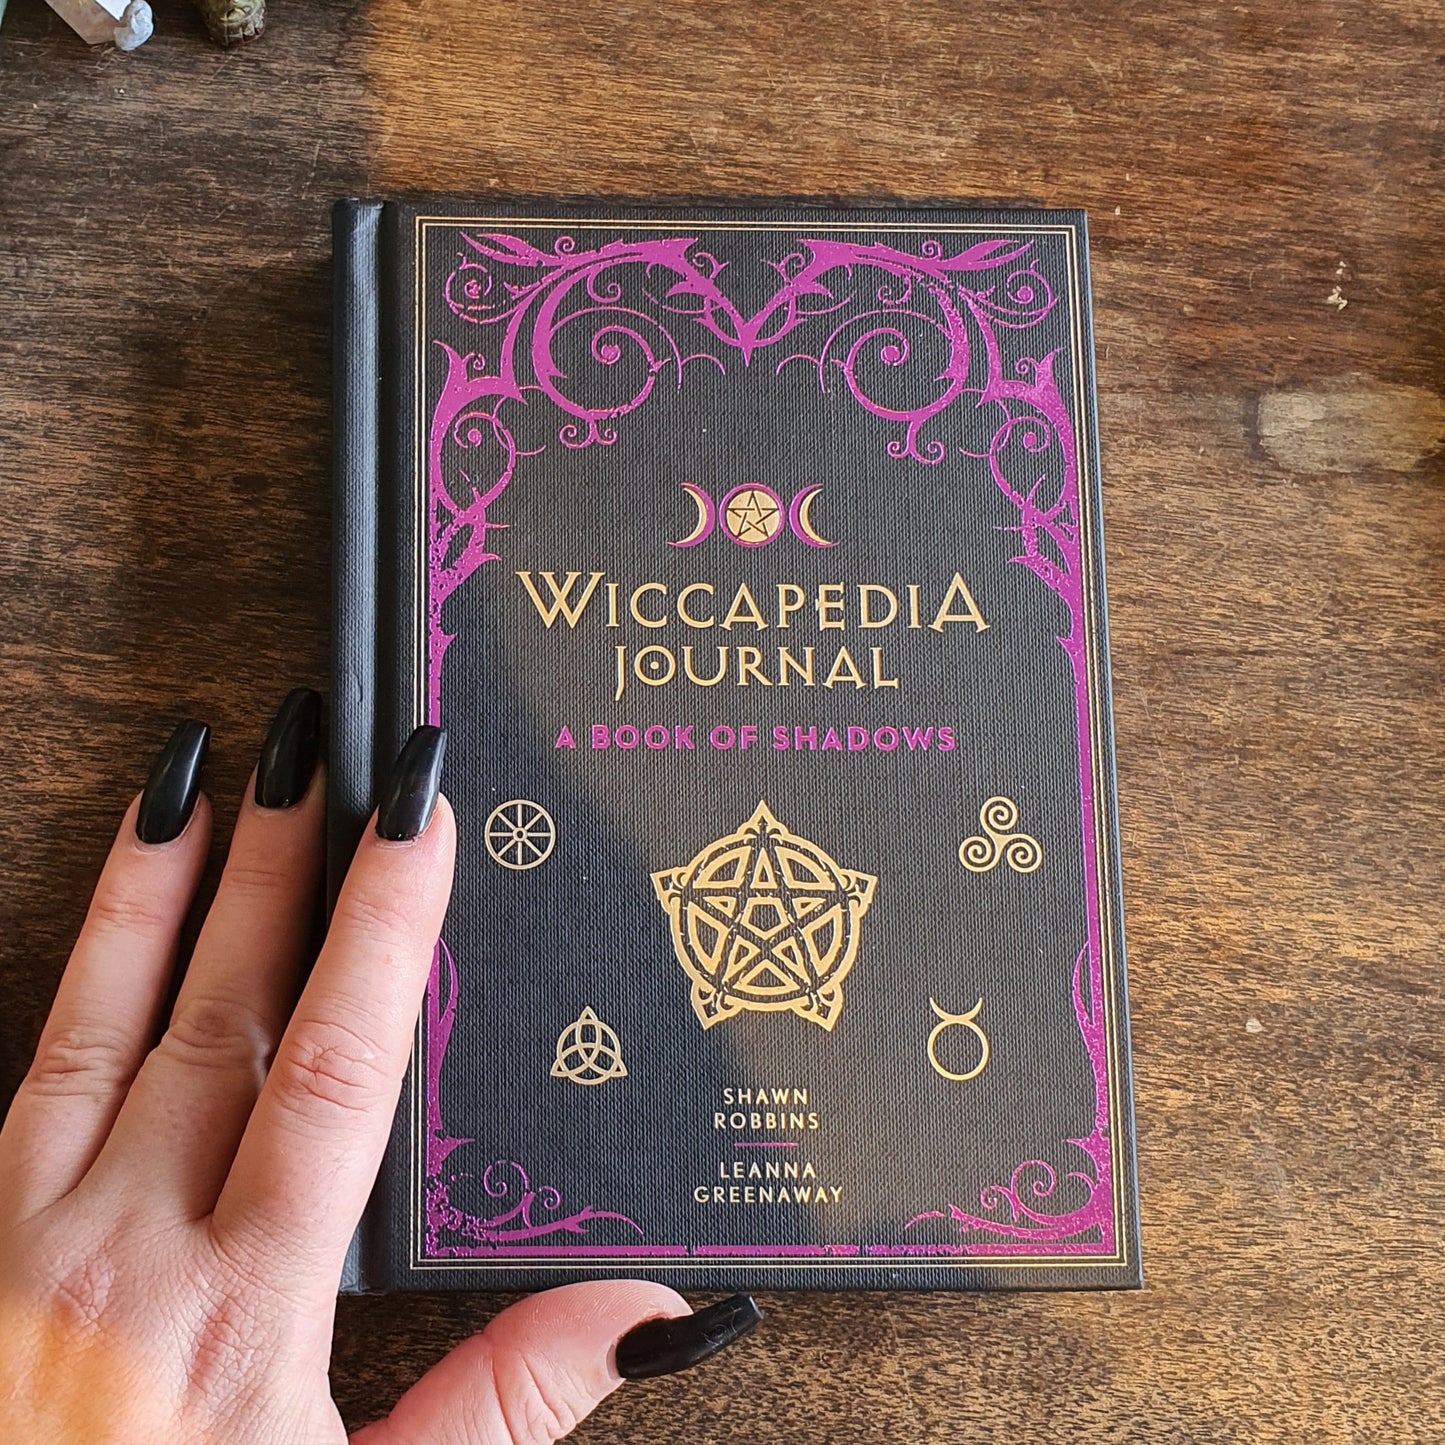 Wiccapedia Journal - A Book of Shadows